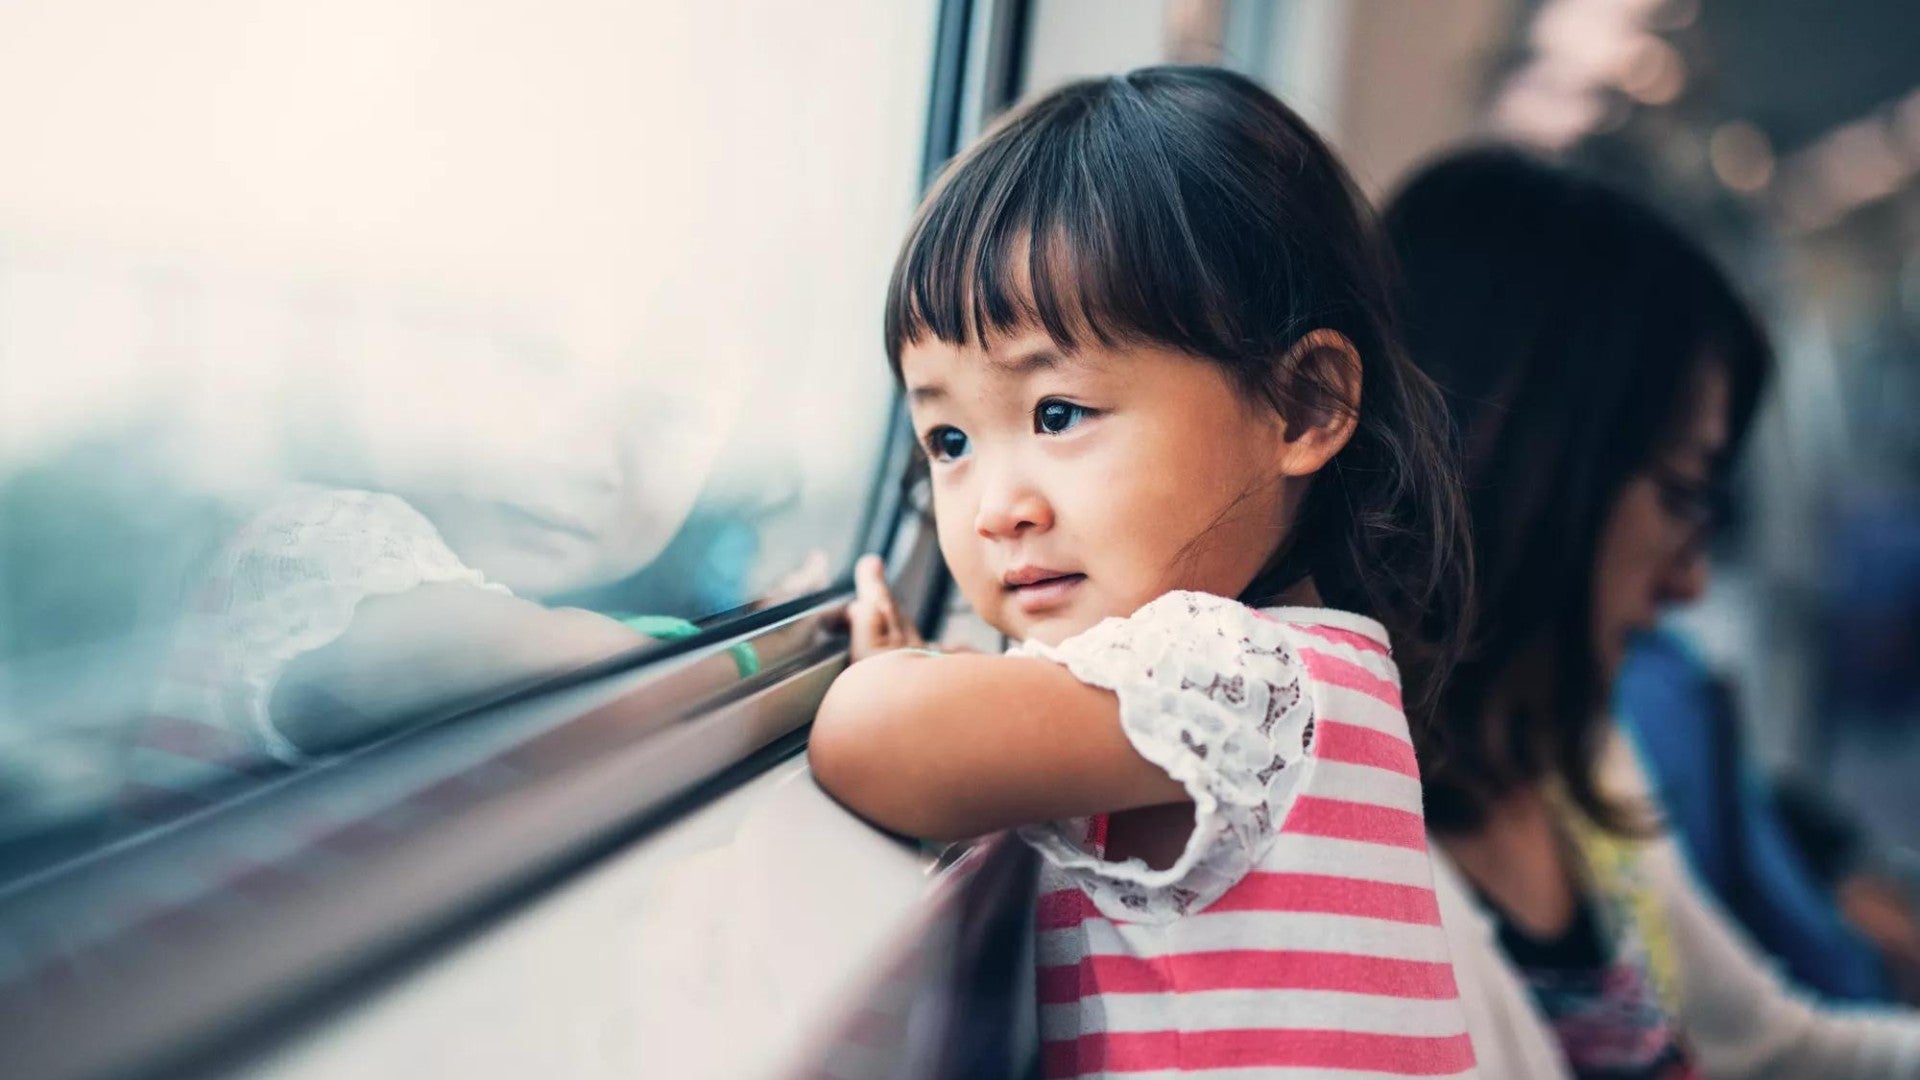 A young girl looks out the window of a passenger train.